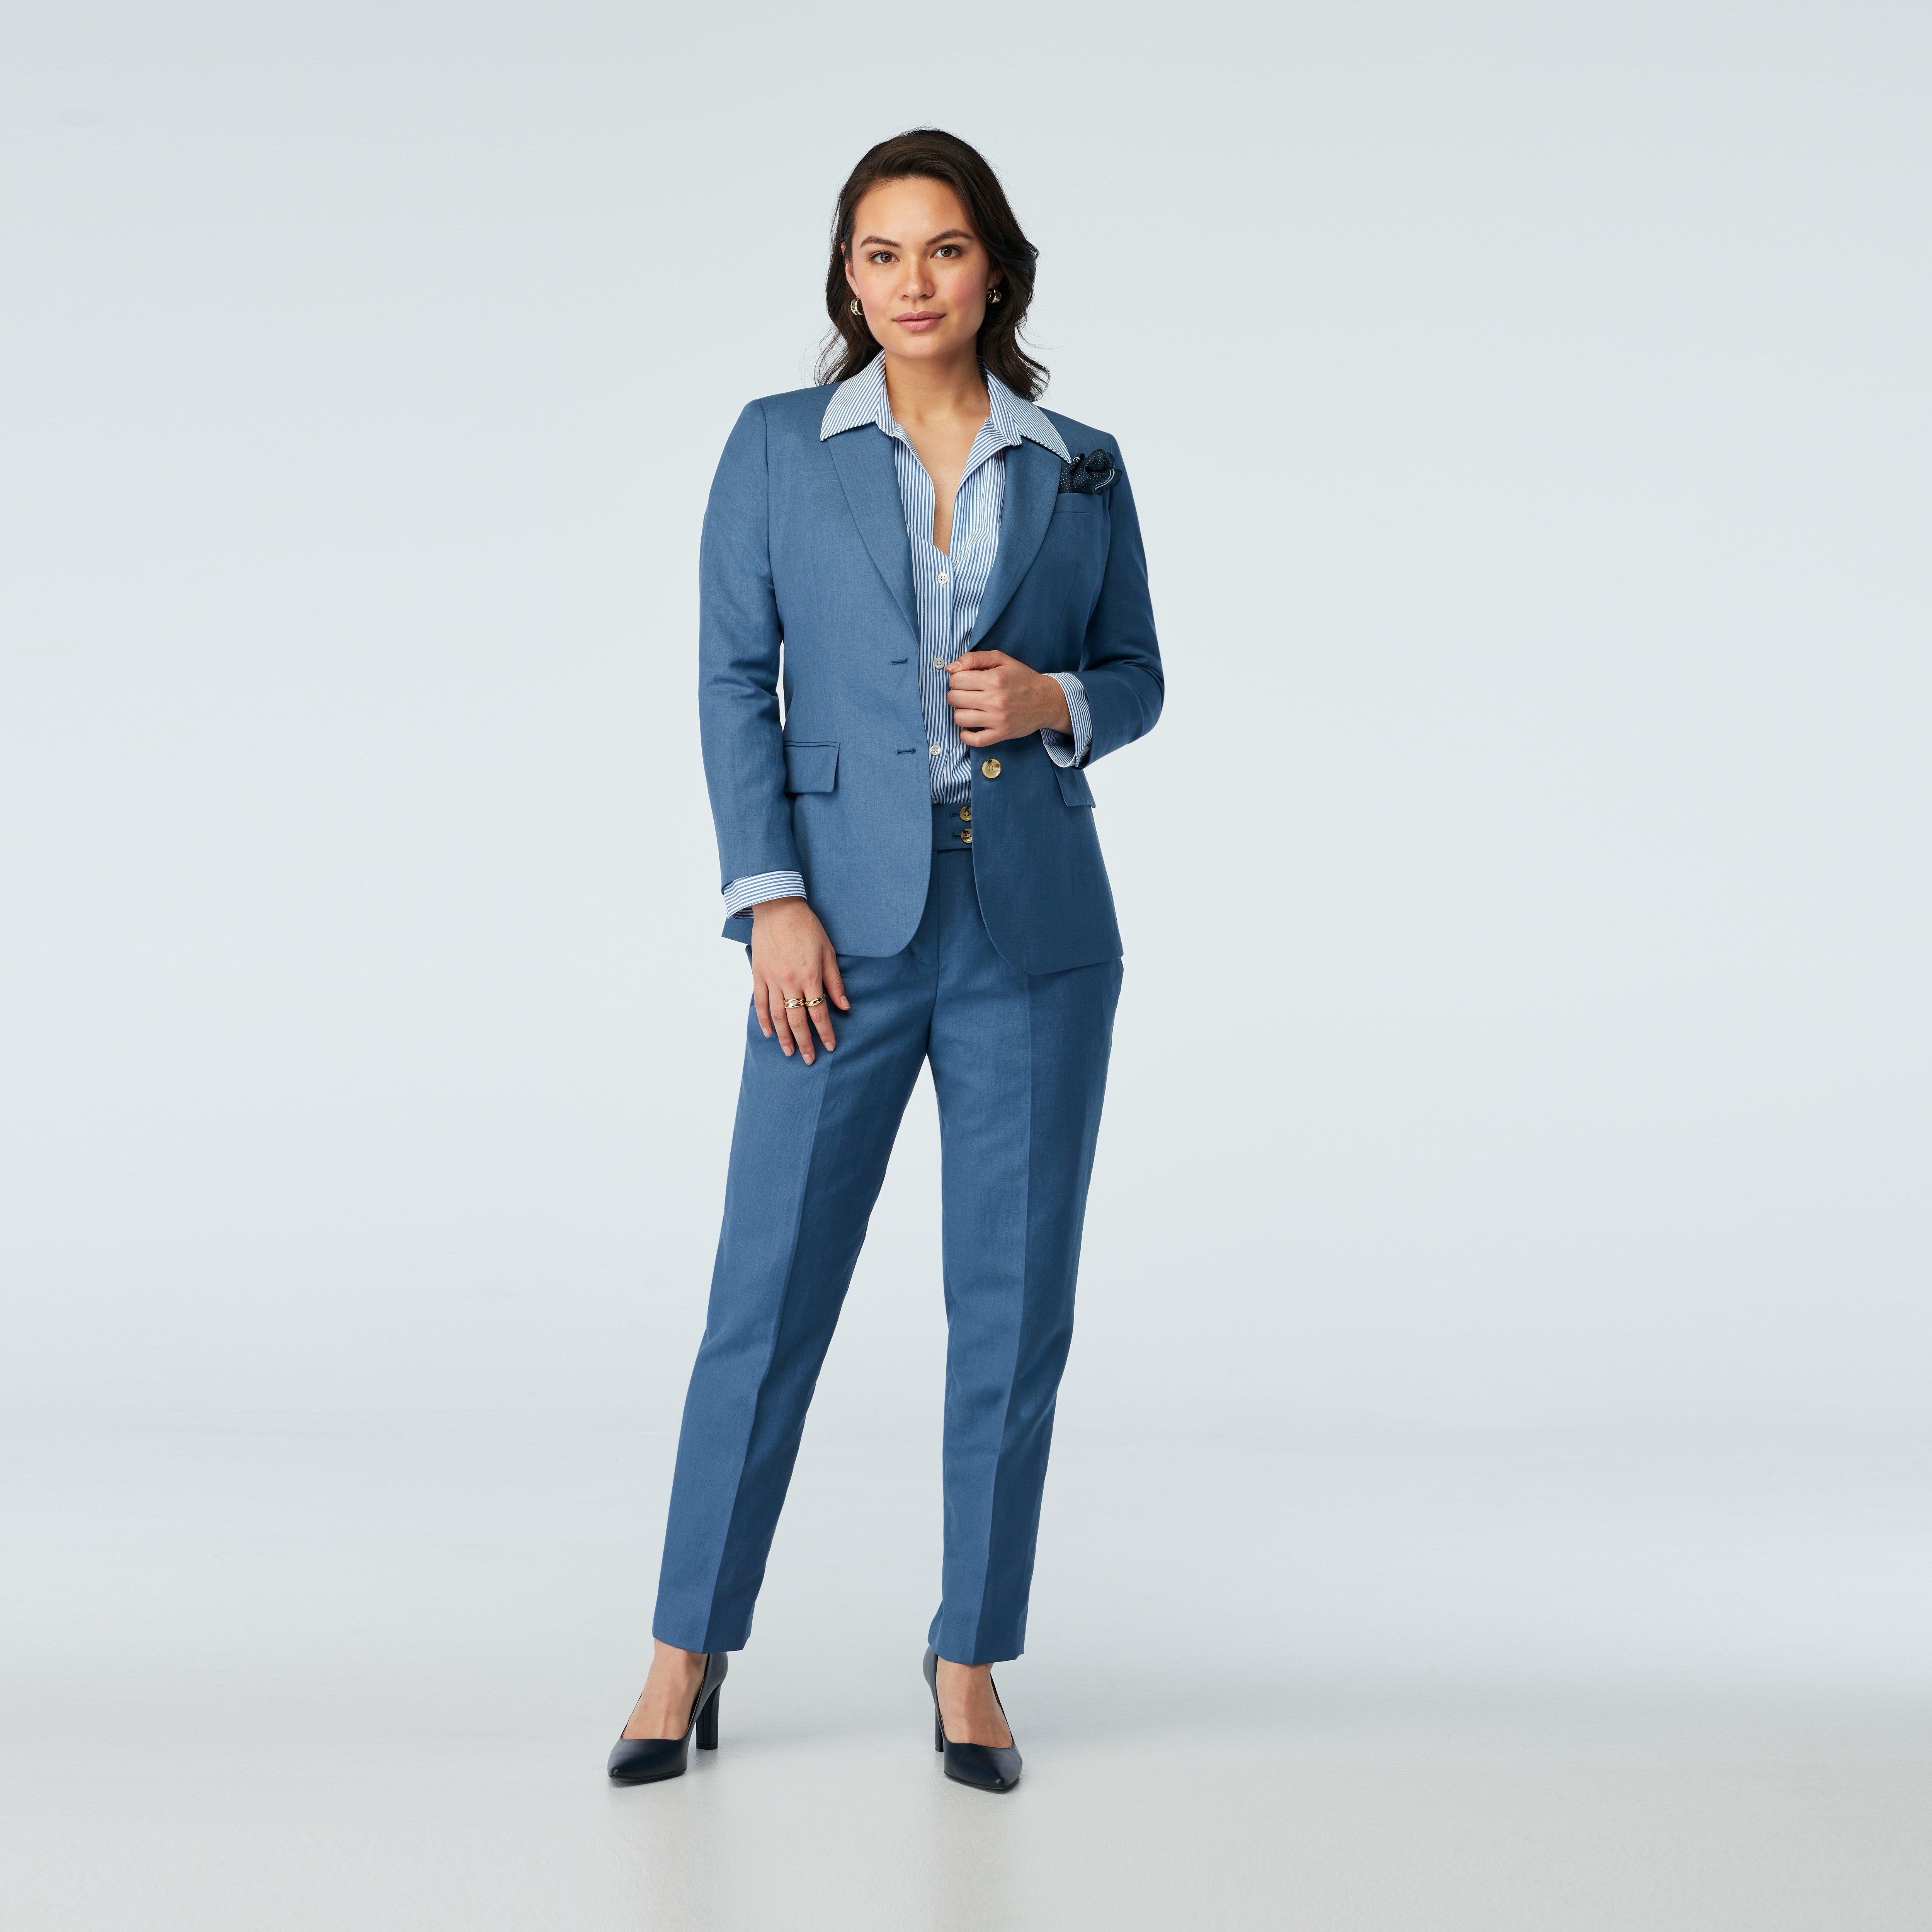 Custom Suits Made For You - Kelly Wool Silk Stone Blue Suit Women ...